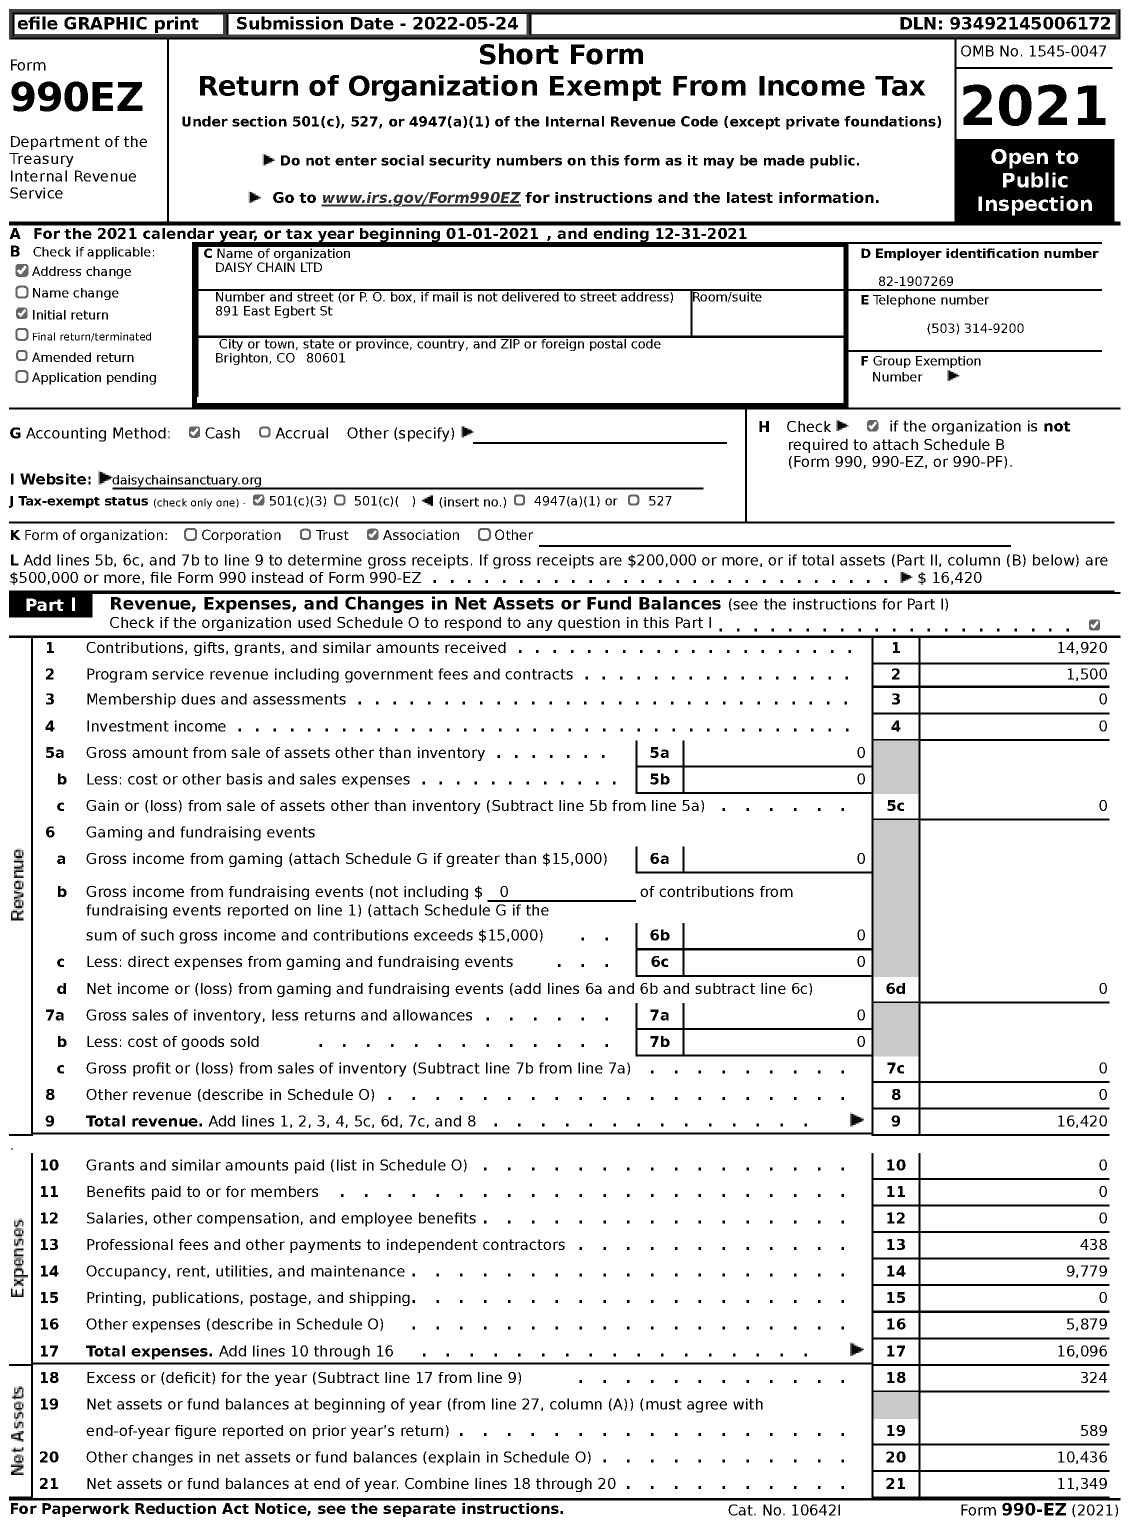 Image of first page of 2021 Form 990EZ for Daisy Chain